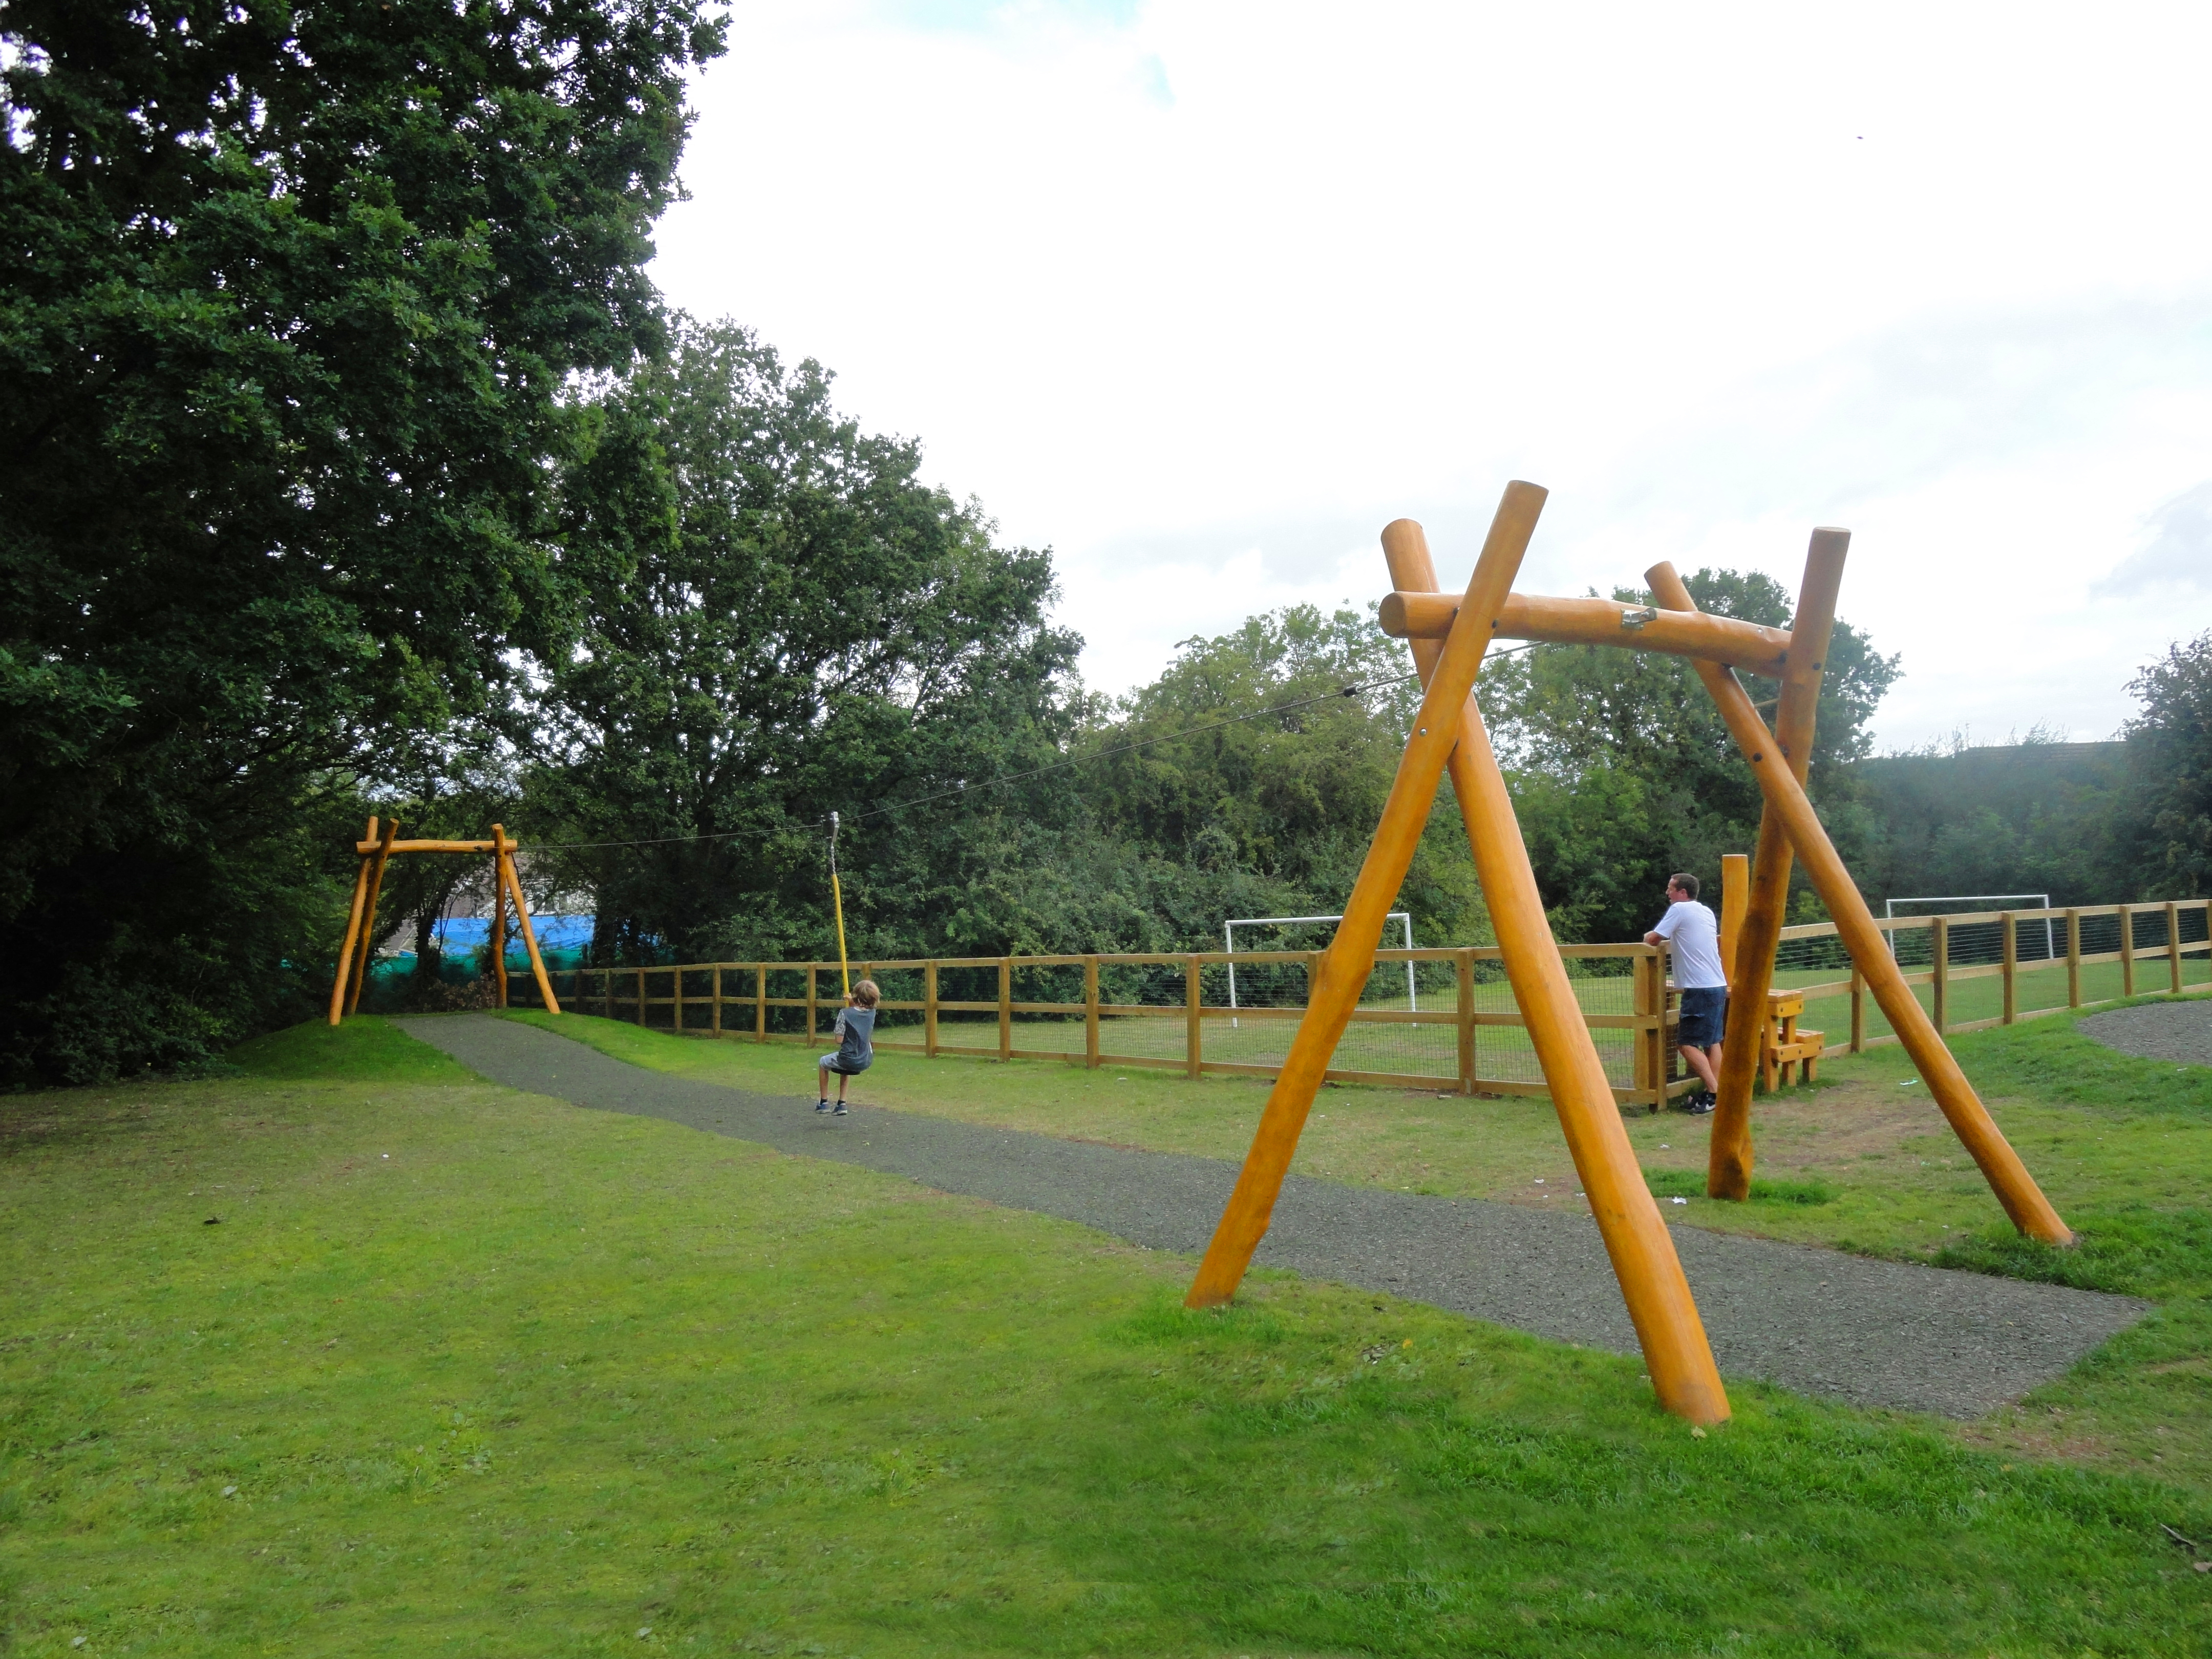 New Playground for Carpenders Park in Watford | The Children's Playground Company